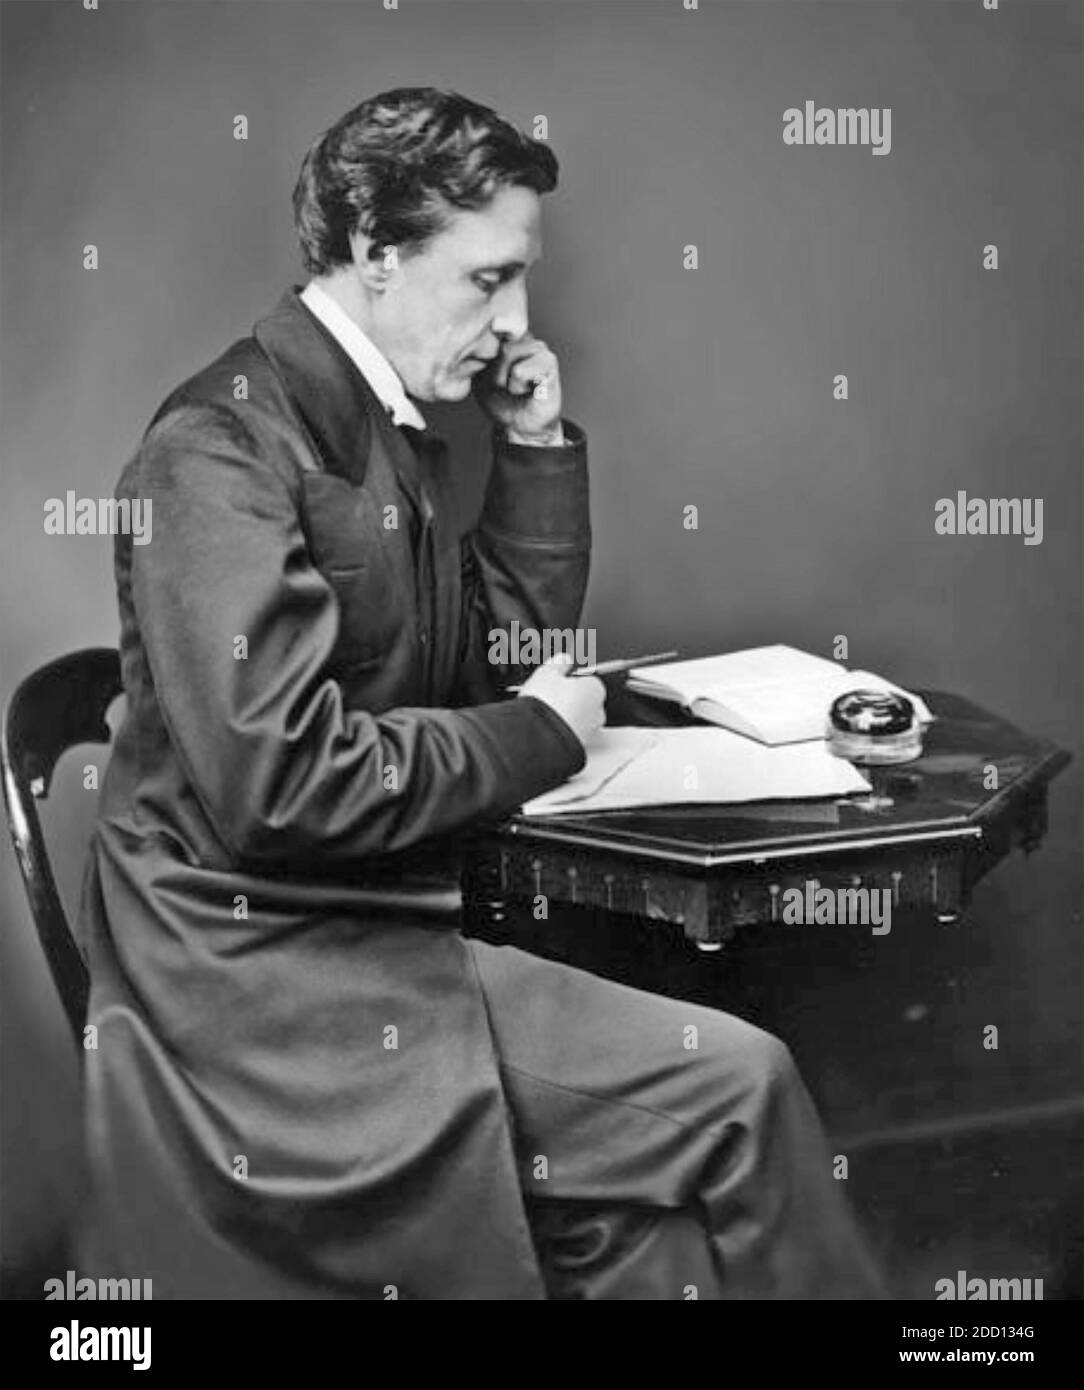 LEWIS CARROLL (1832-1898) pen name of Charles Dodgson, English writer of children's fiction including Alice's Adventures in Wonderland, about 1870. Stock Photo